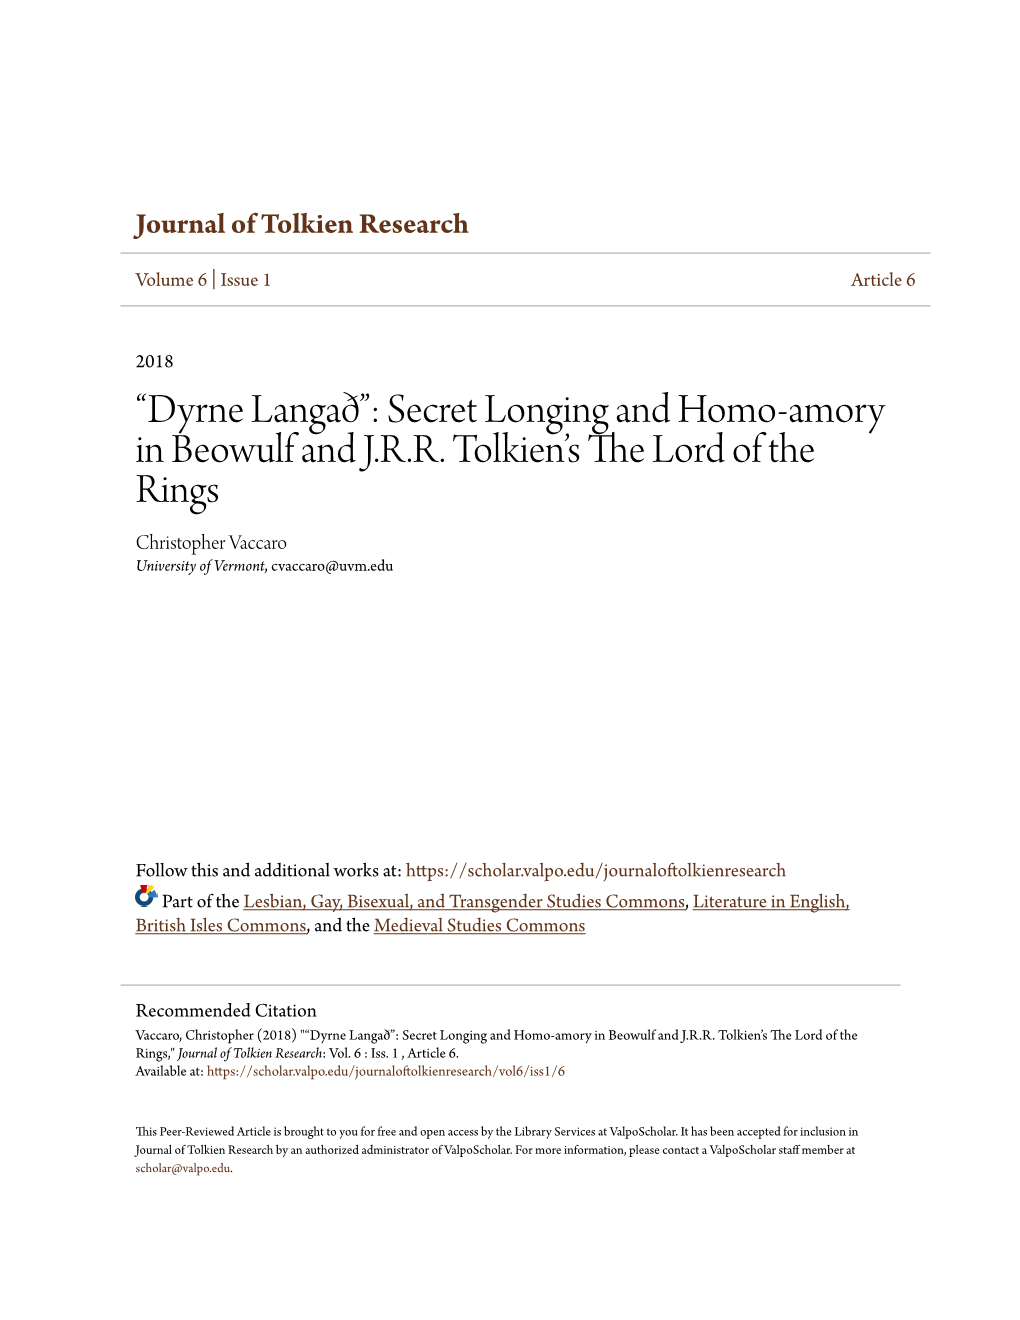 “Dyrne Langað”: Secret Longing and Homo-Amory in Beowulf and J.R.R. Tolkien’S the Lord of the Rings Christopher Vaccaro University of Vermont, Cvaccaro@Uvm.Edu